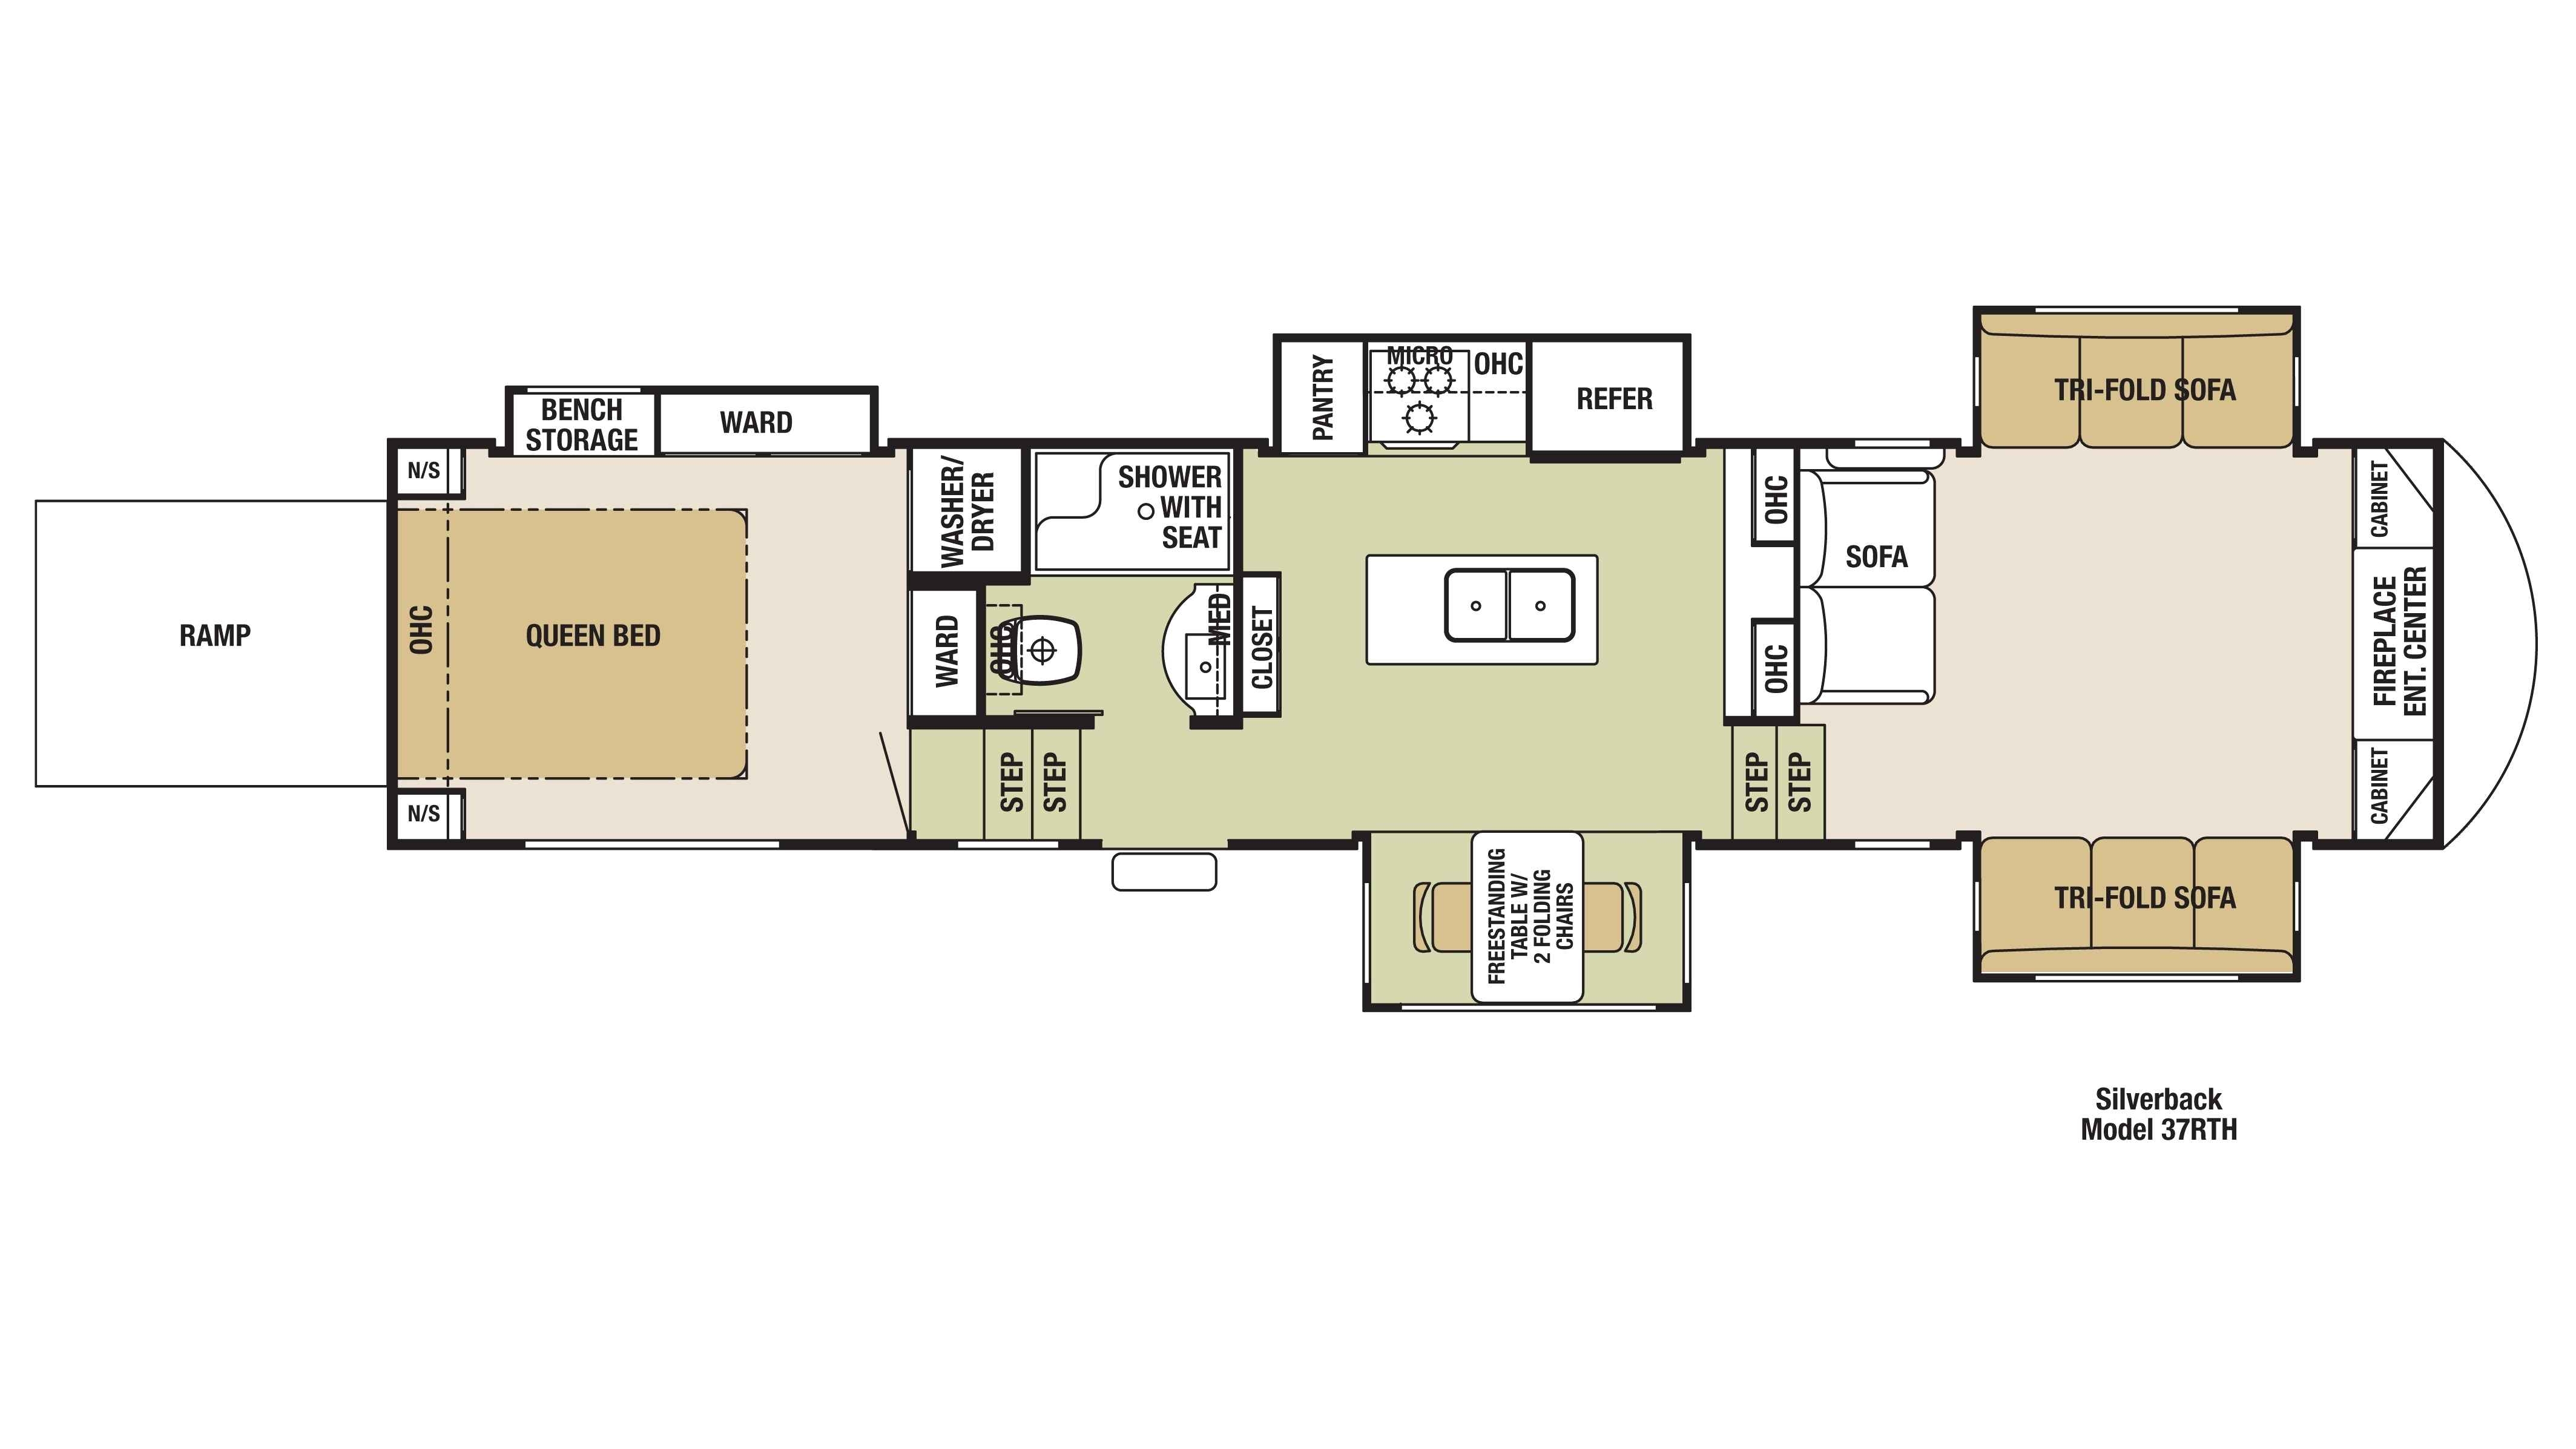 3 bedroom 5th wheel floor plans as well as 57 awesome floor plans 2018 home plans